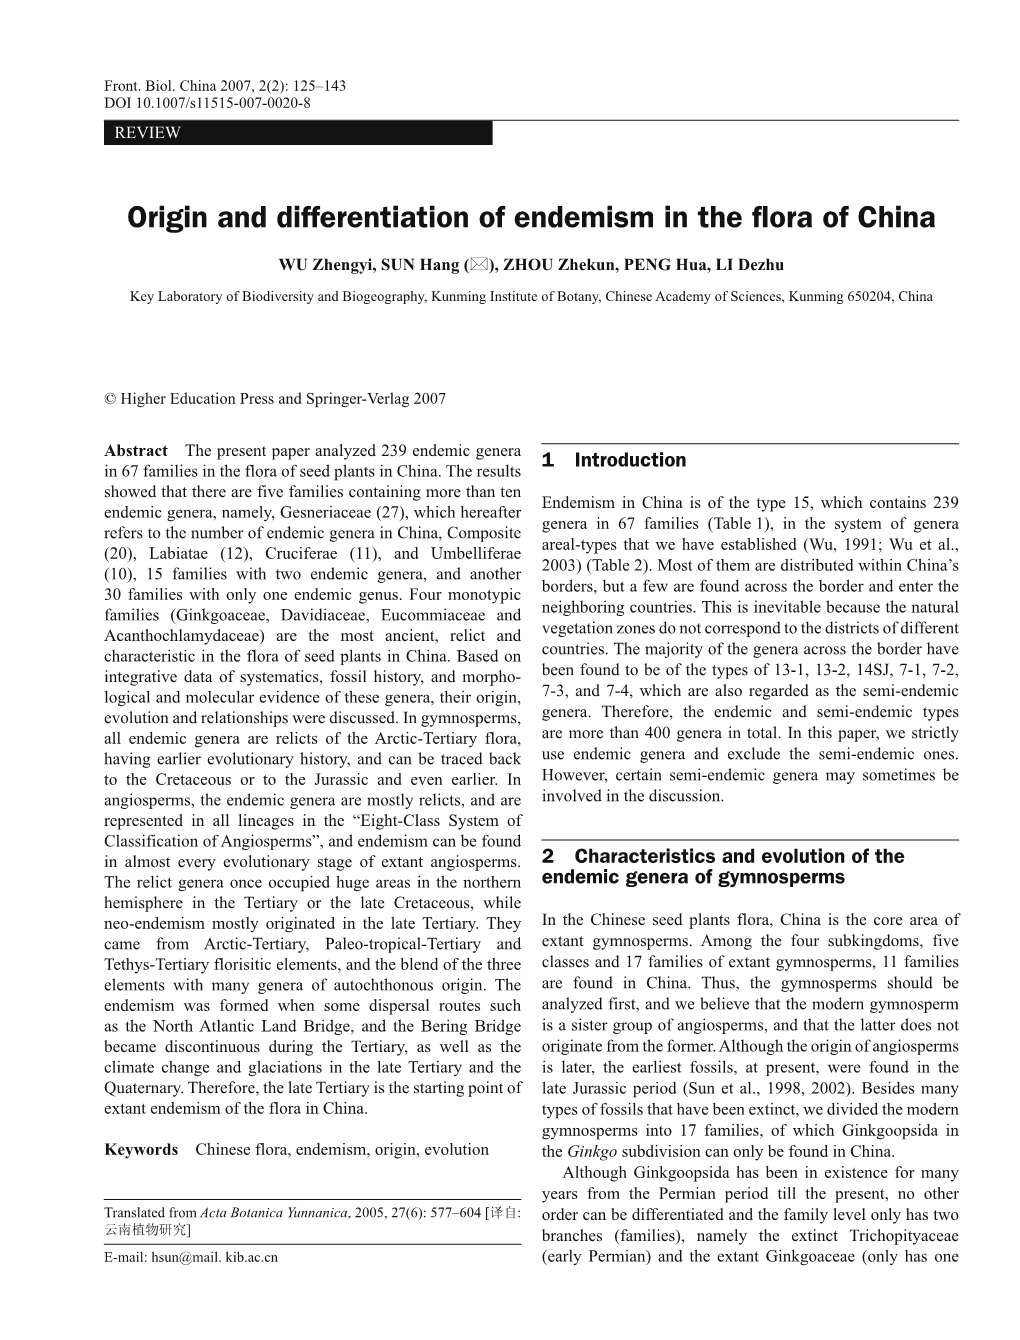 Origin and Differentiation of Endemism in the Flora of China